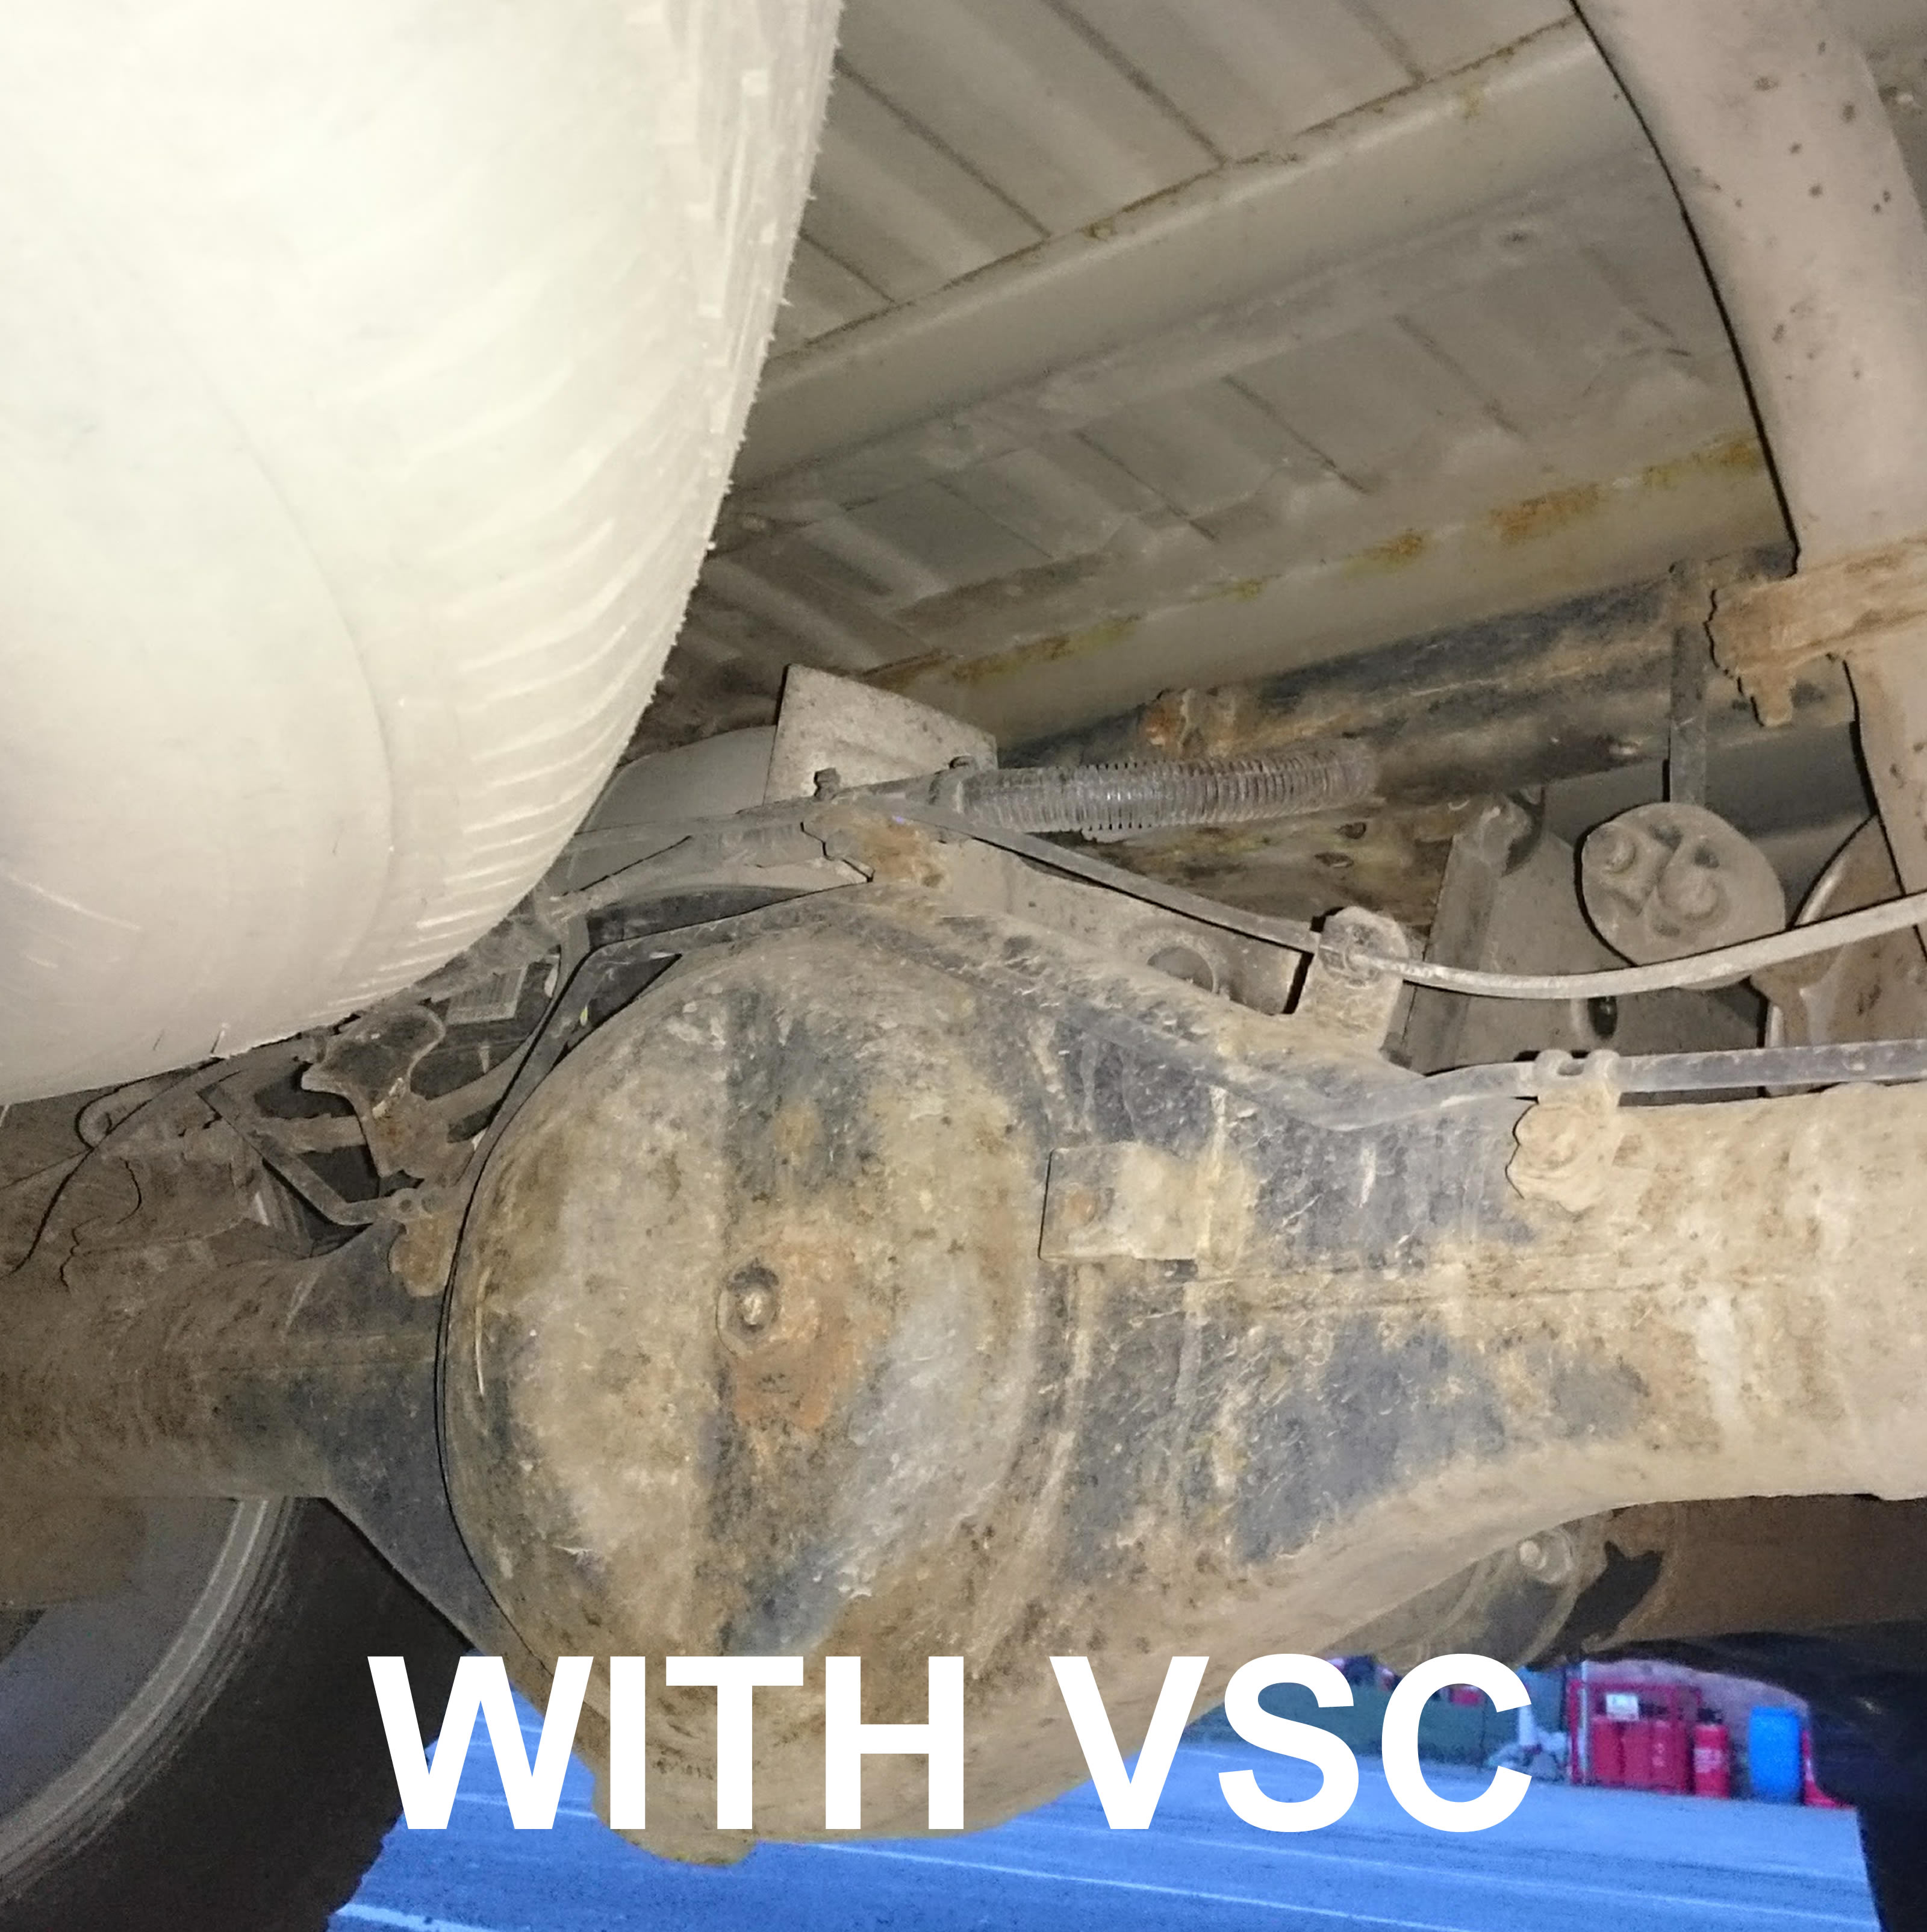 VSC (Vehicle Stability Control) 